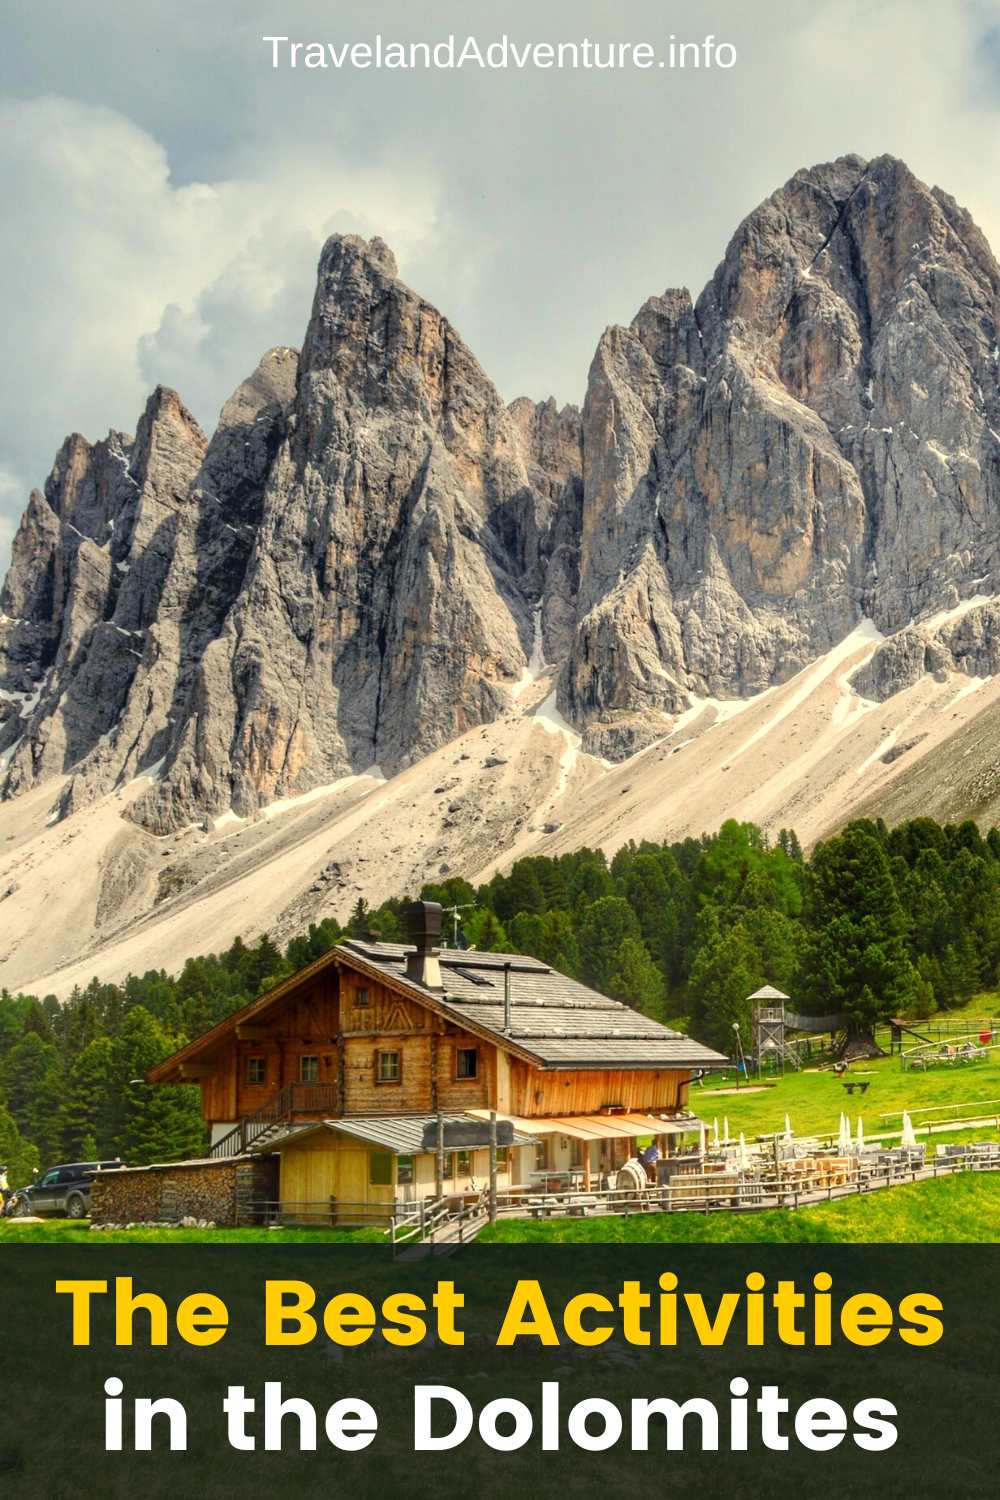 From Hiking to Skiing All the Best Activities in the Dolomites